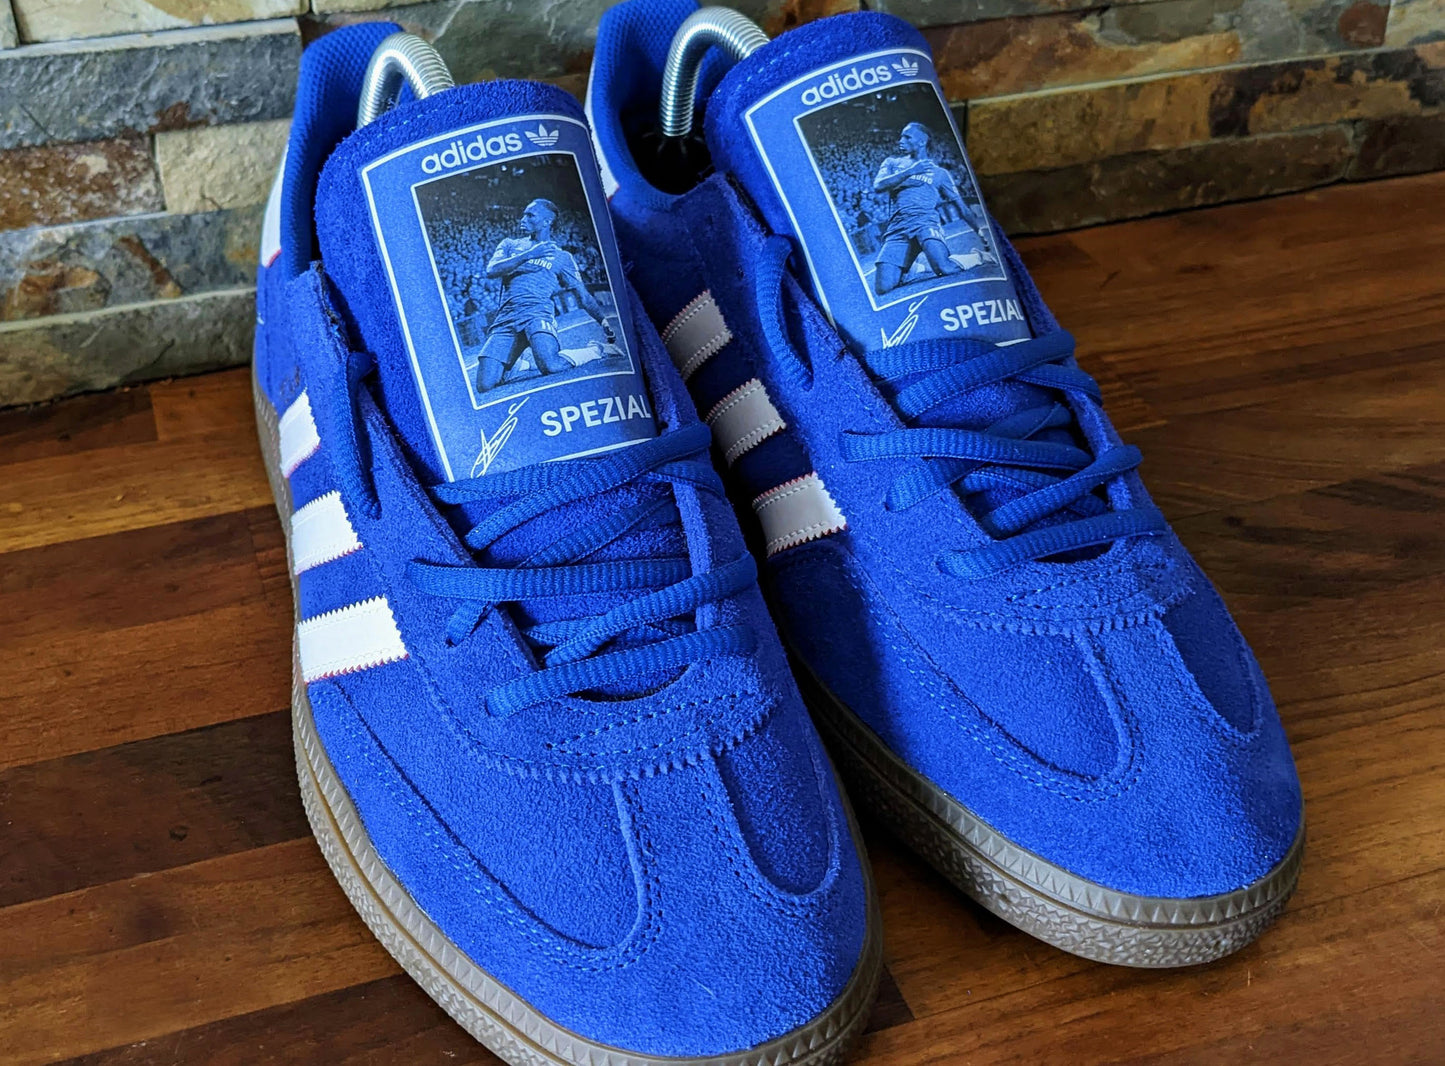 Limited edition Chelsea FC Didier Drogba inspired blue /white/ suede Adidas custom Handball Spezial  trainers / sneakers